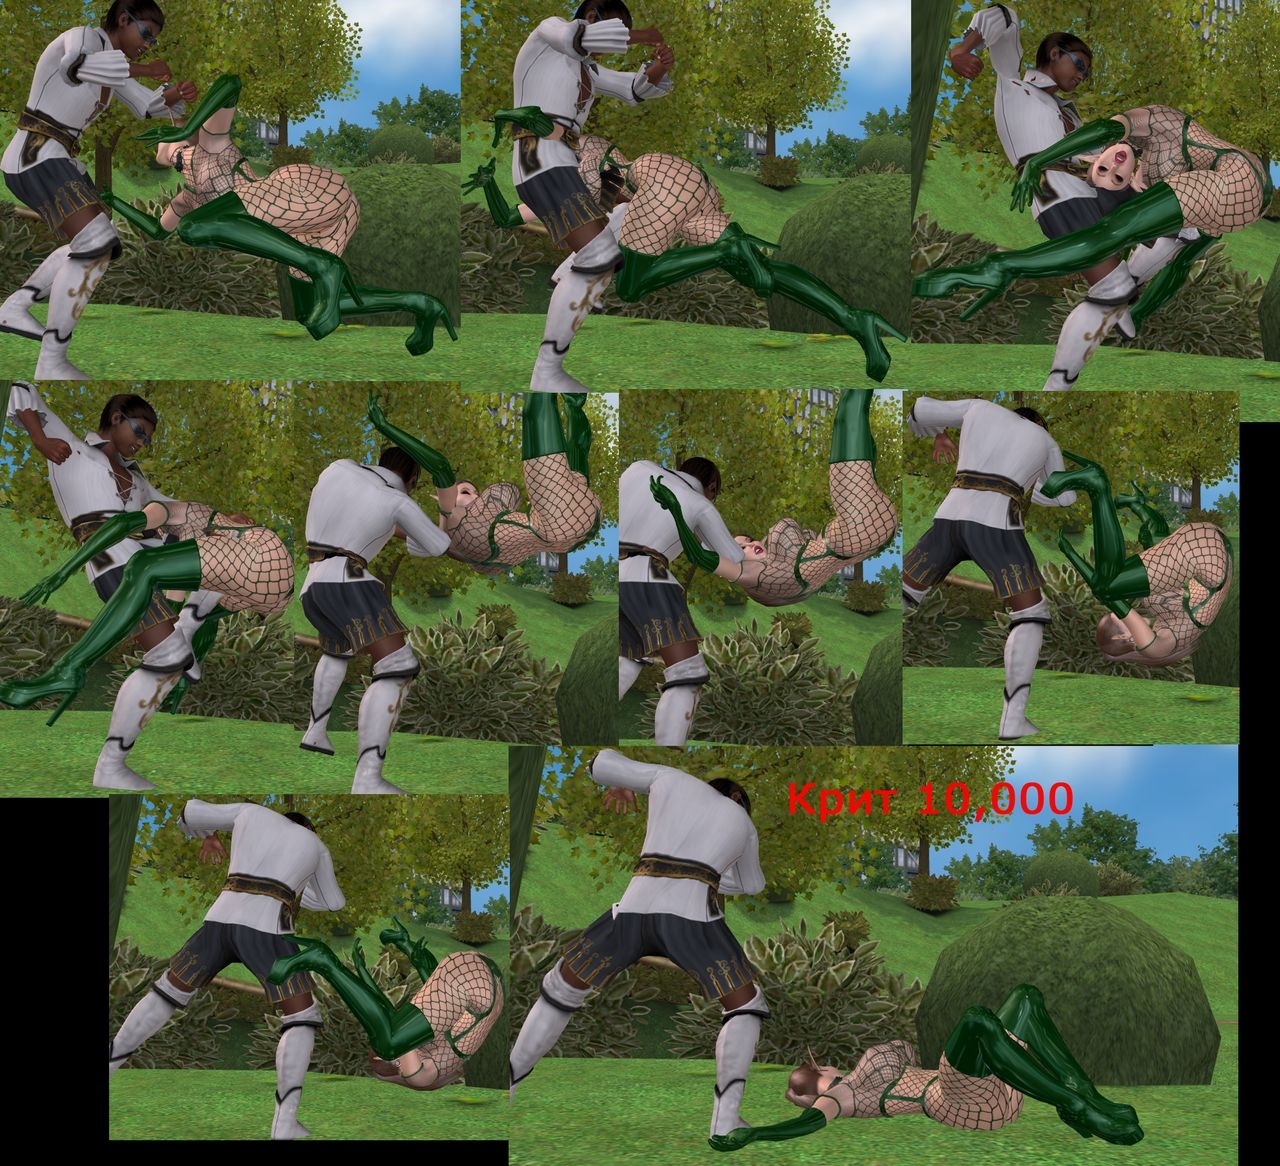 3d Lineage 2 comic comix battle in the woods 30